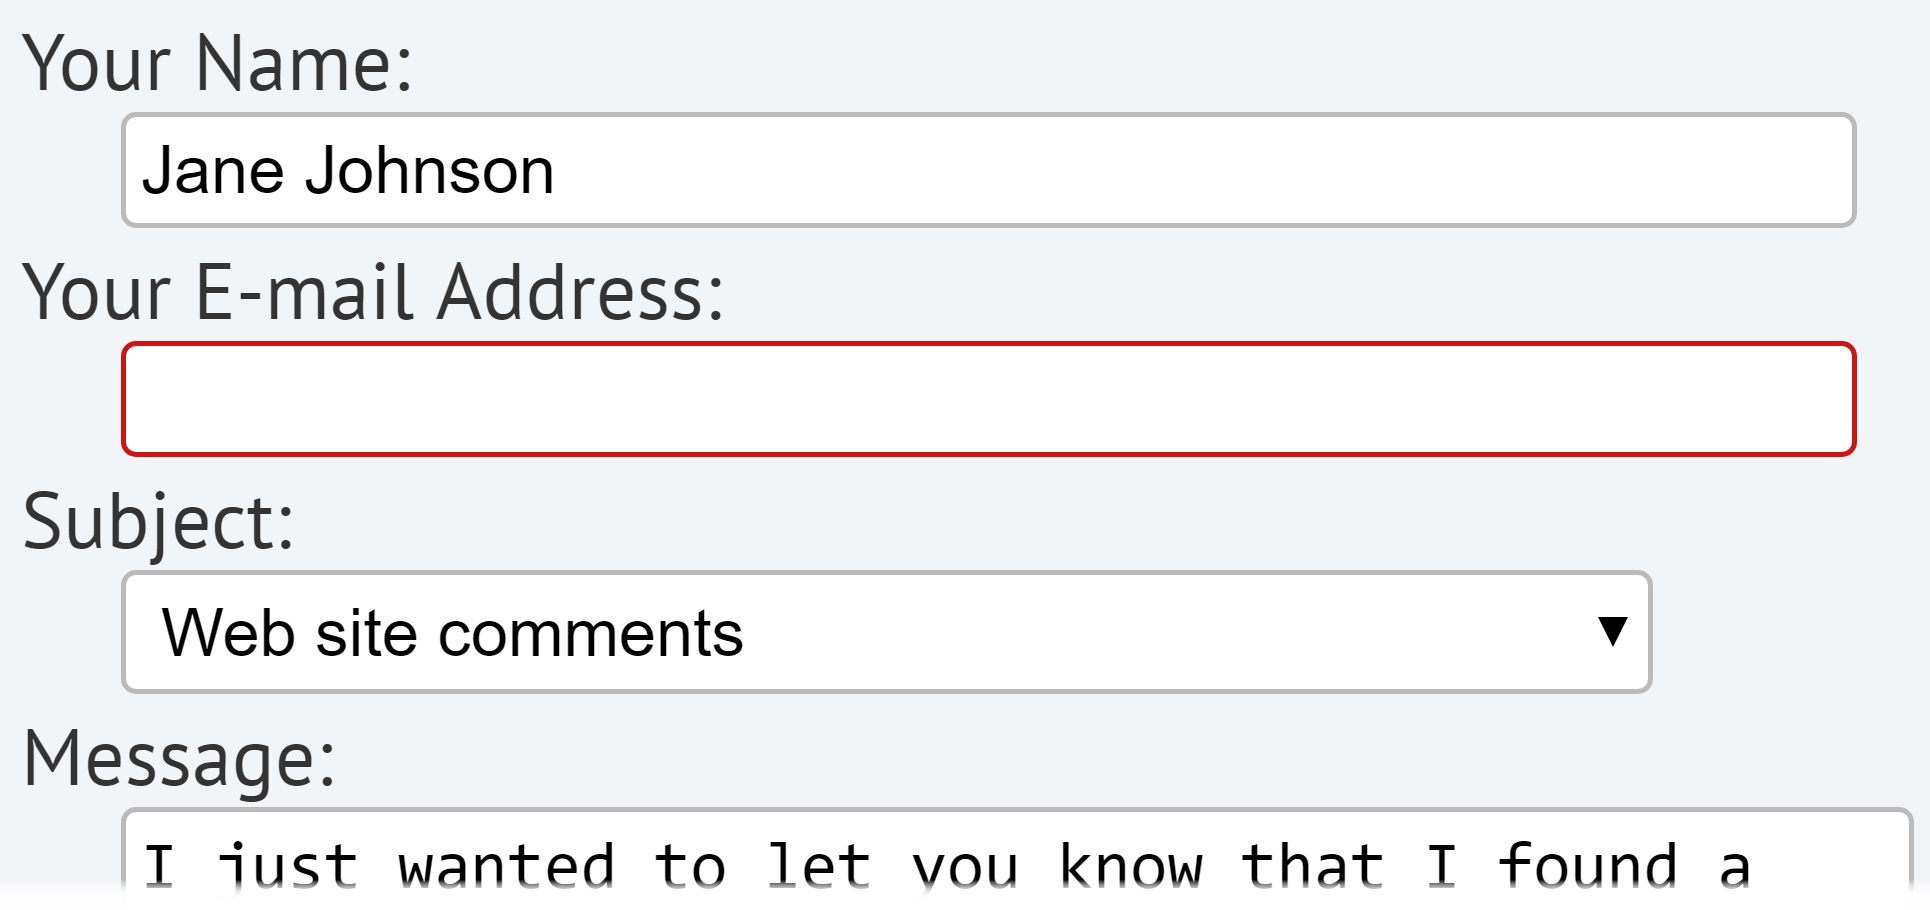 Screenshot of a form where the email address field has a red border, indicating there is an error.